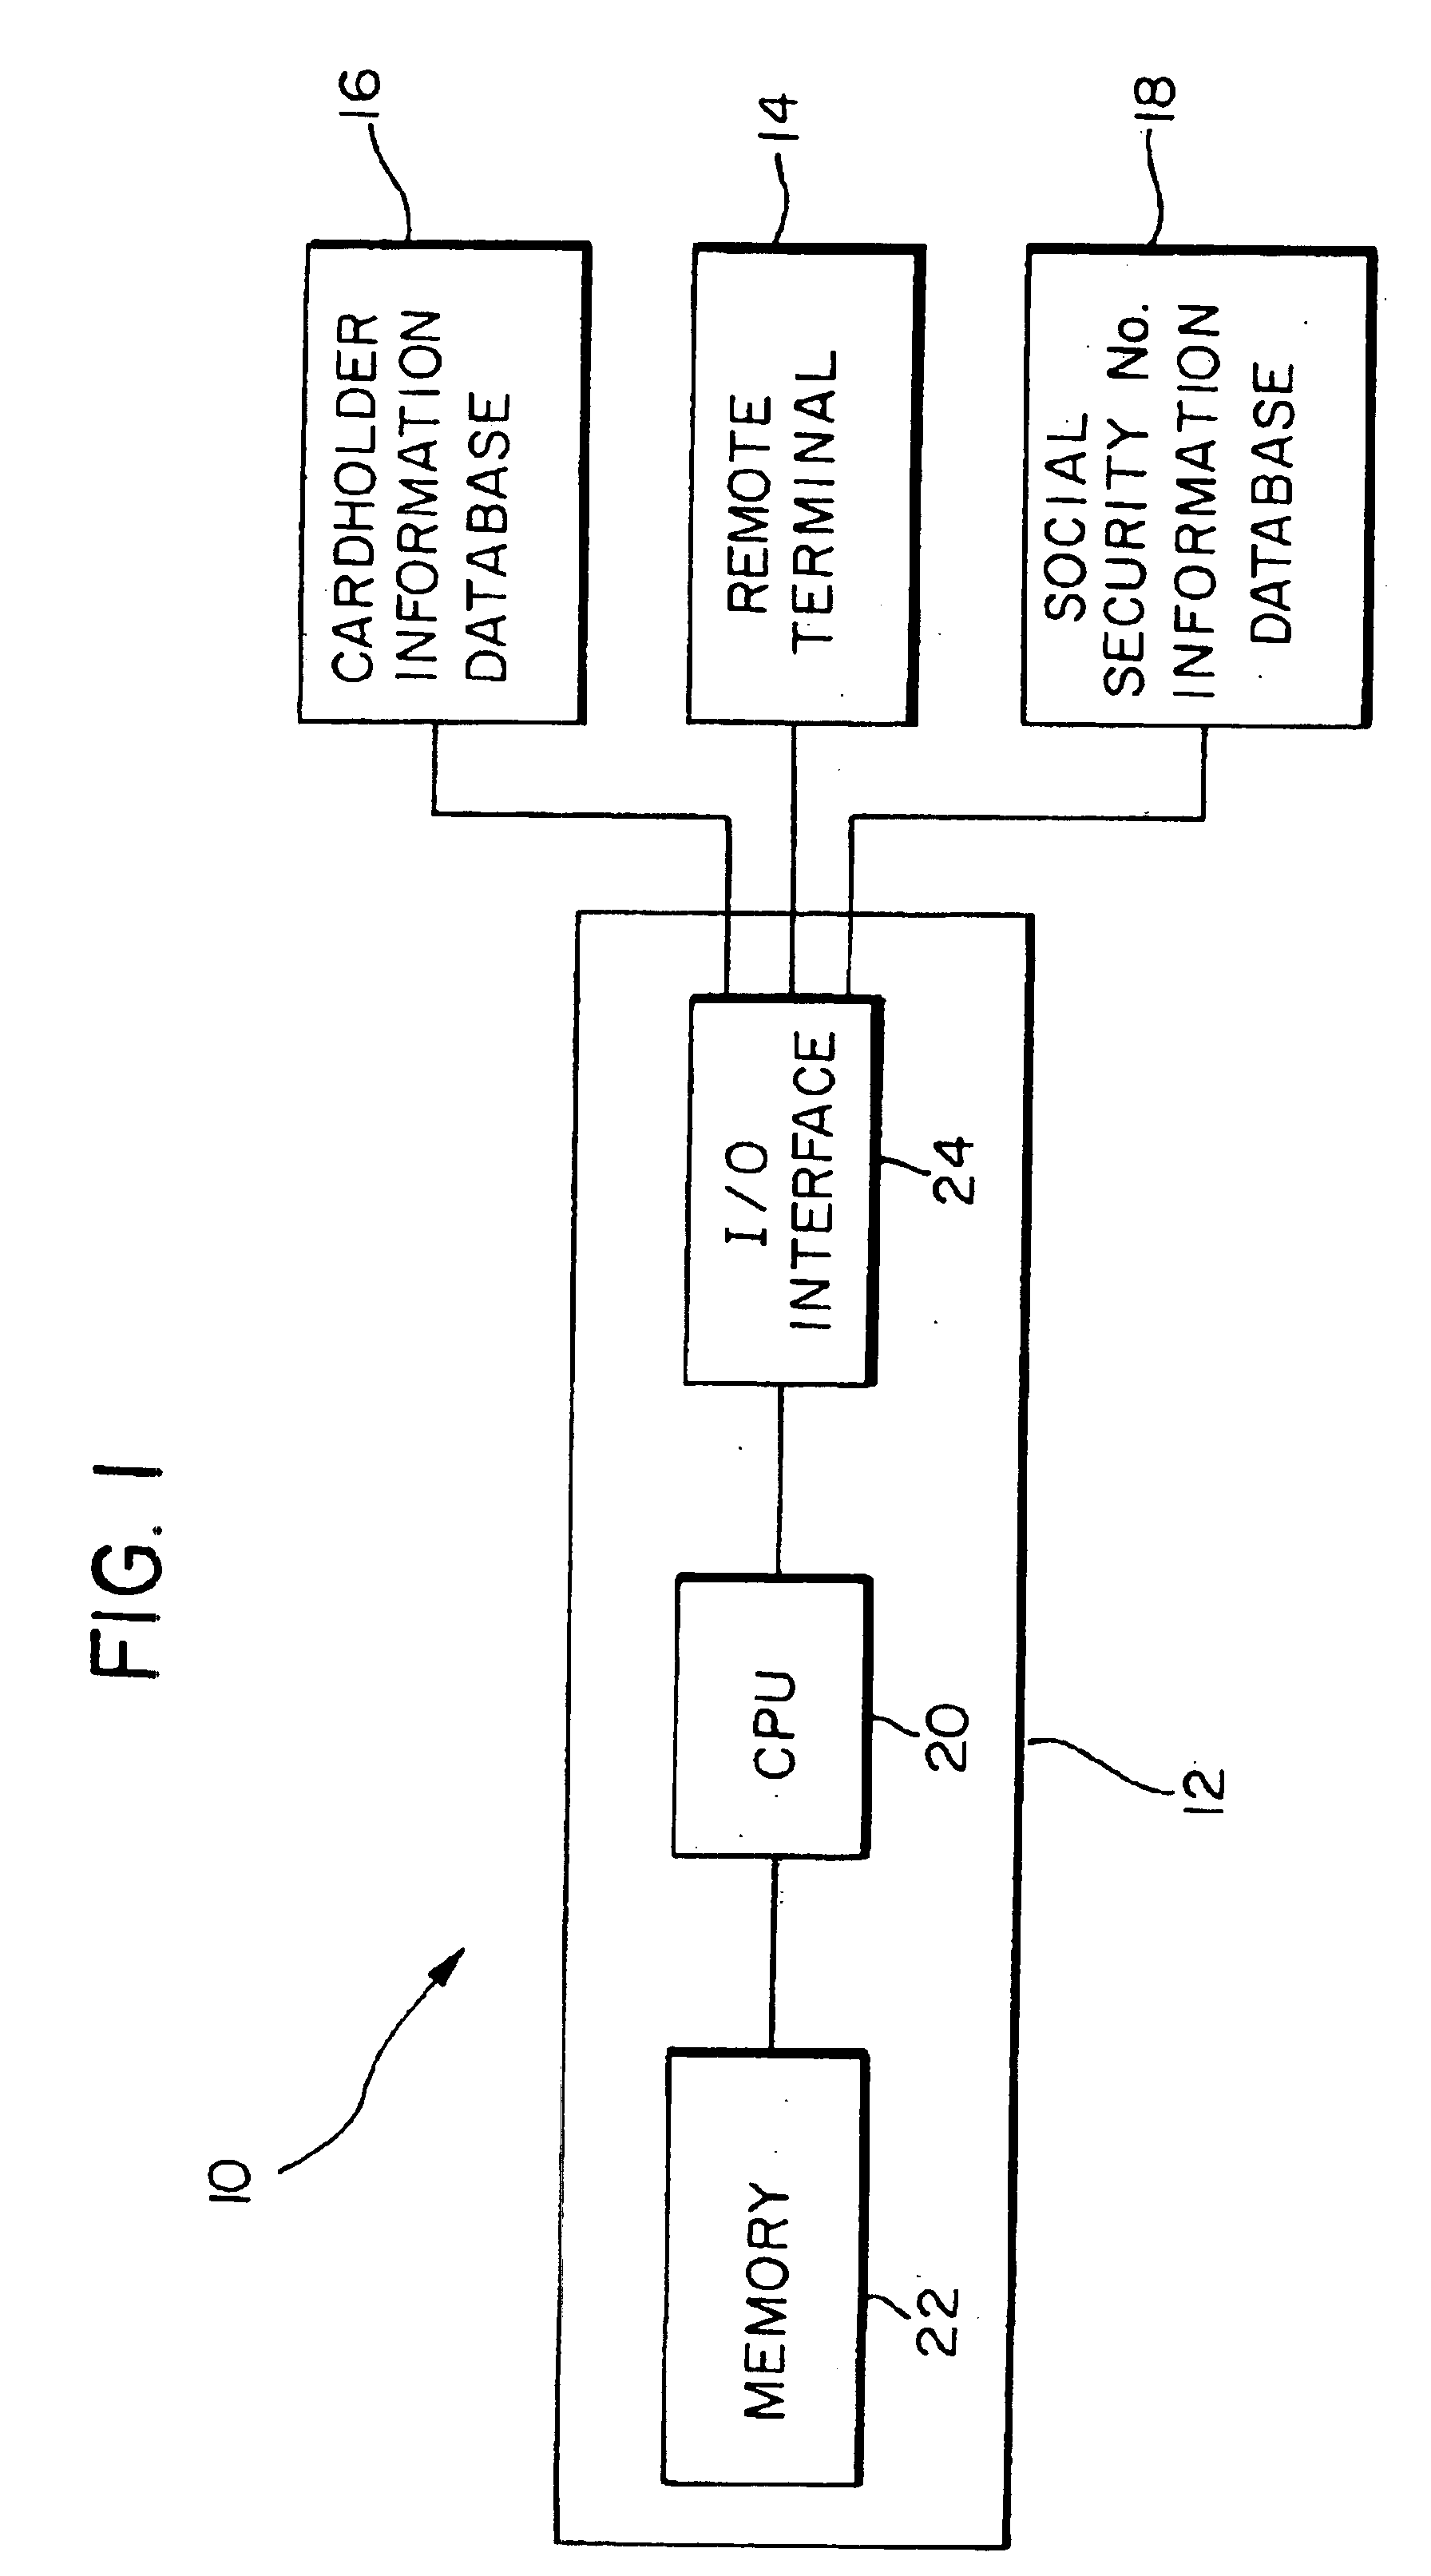 System and method for enhanced fraud detection in automated electronic credit card processing